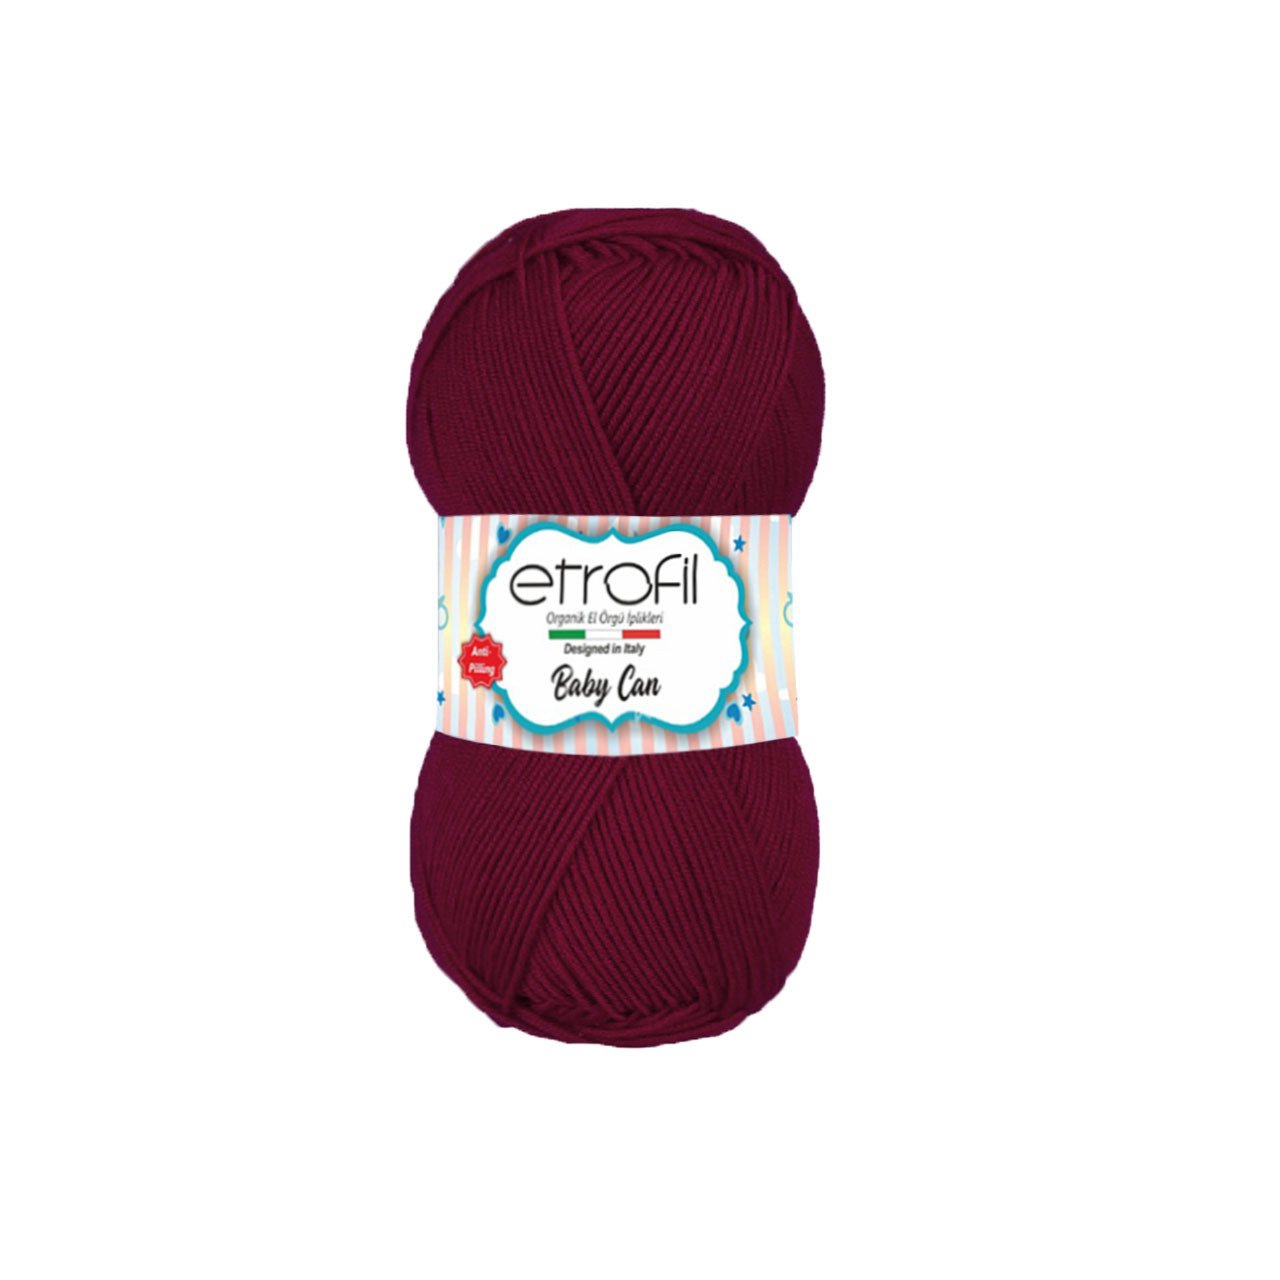 Etrofil Baby Can 80039